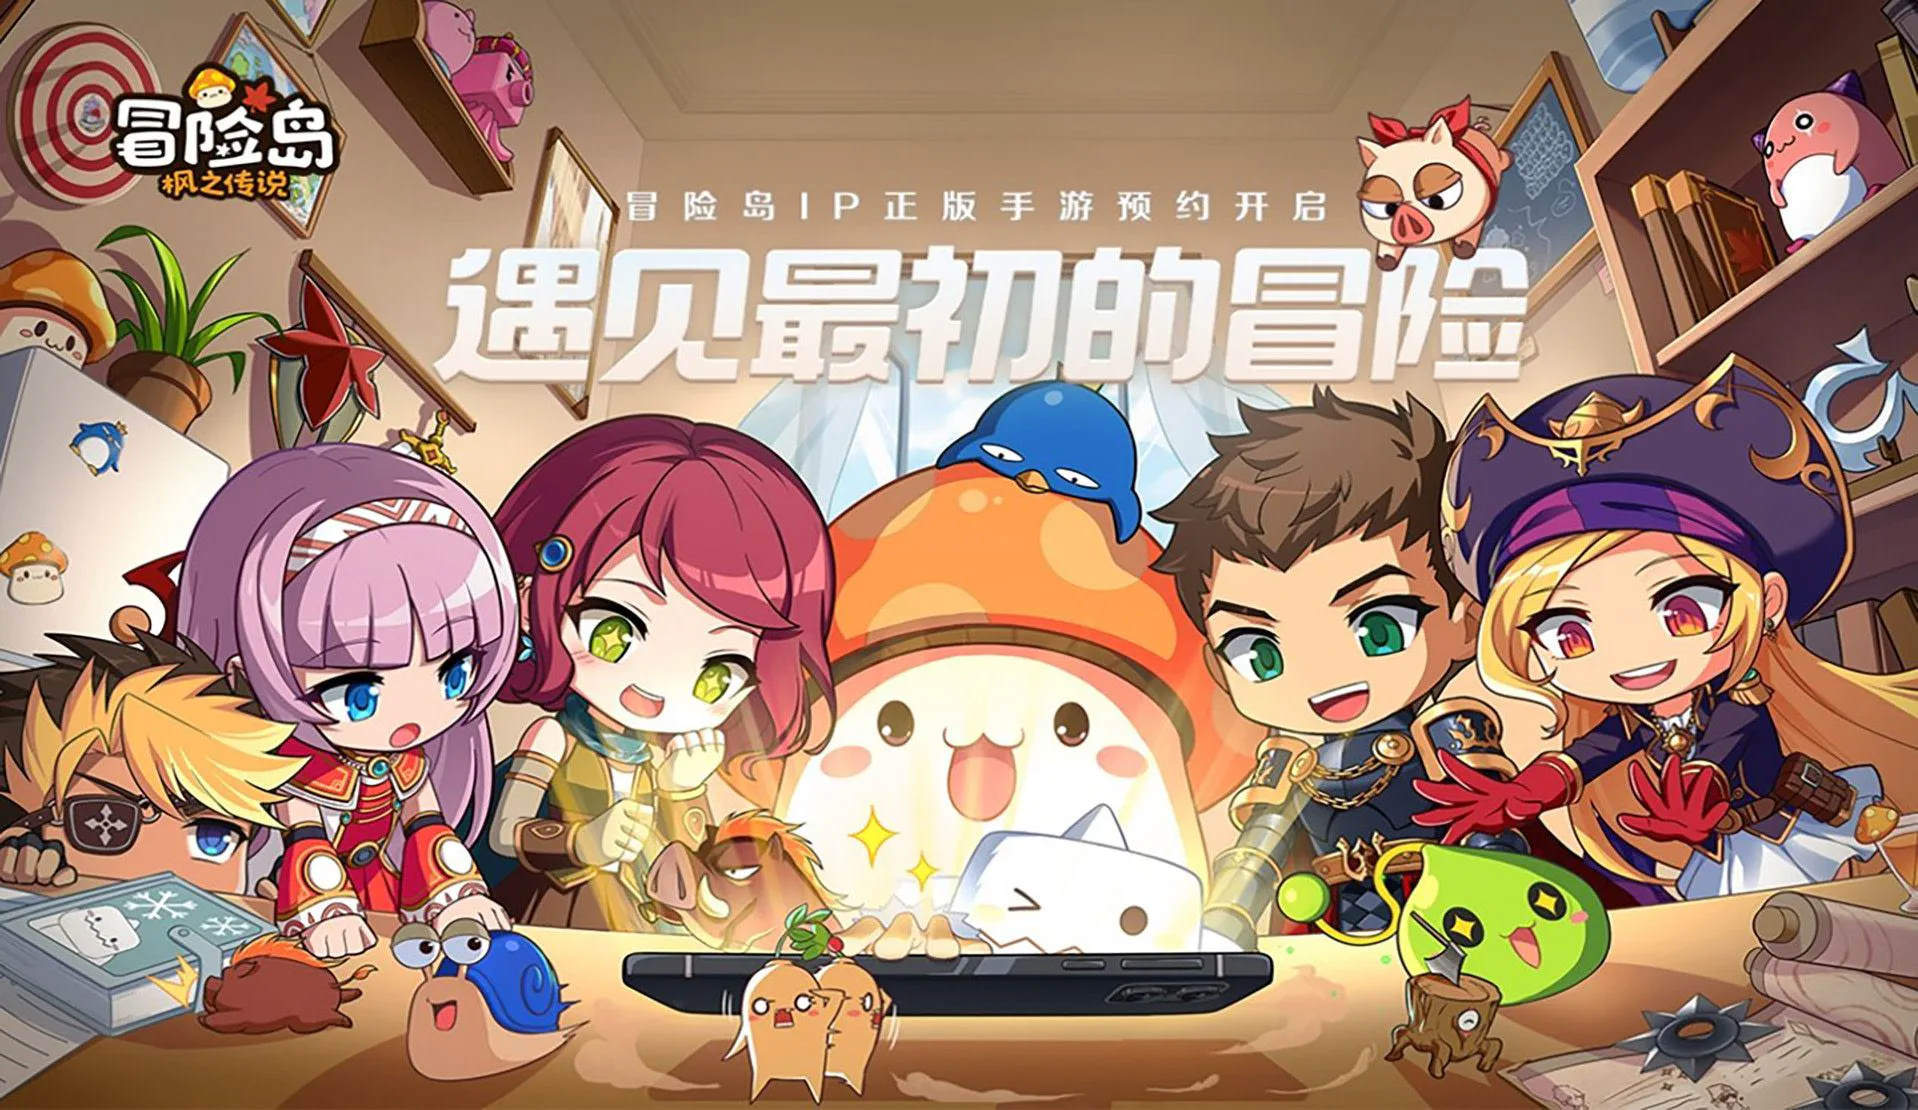 MapleStory Players Deceived for a Decade: Nexon Fined $9 Million for Unfair Practices